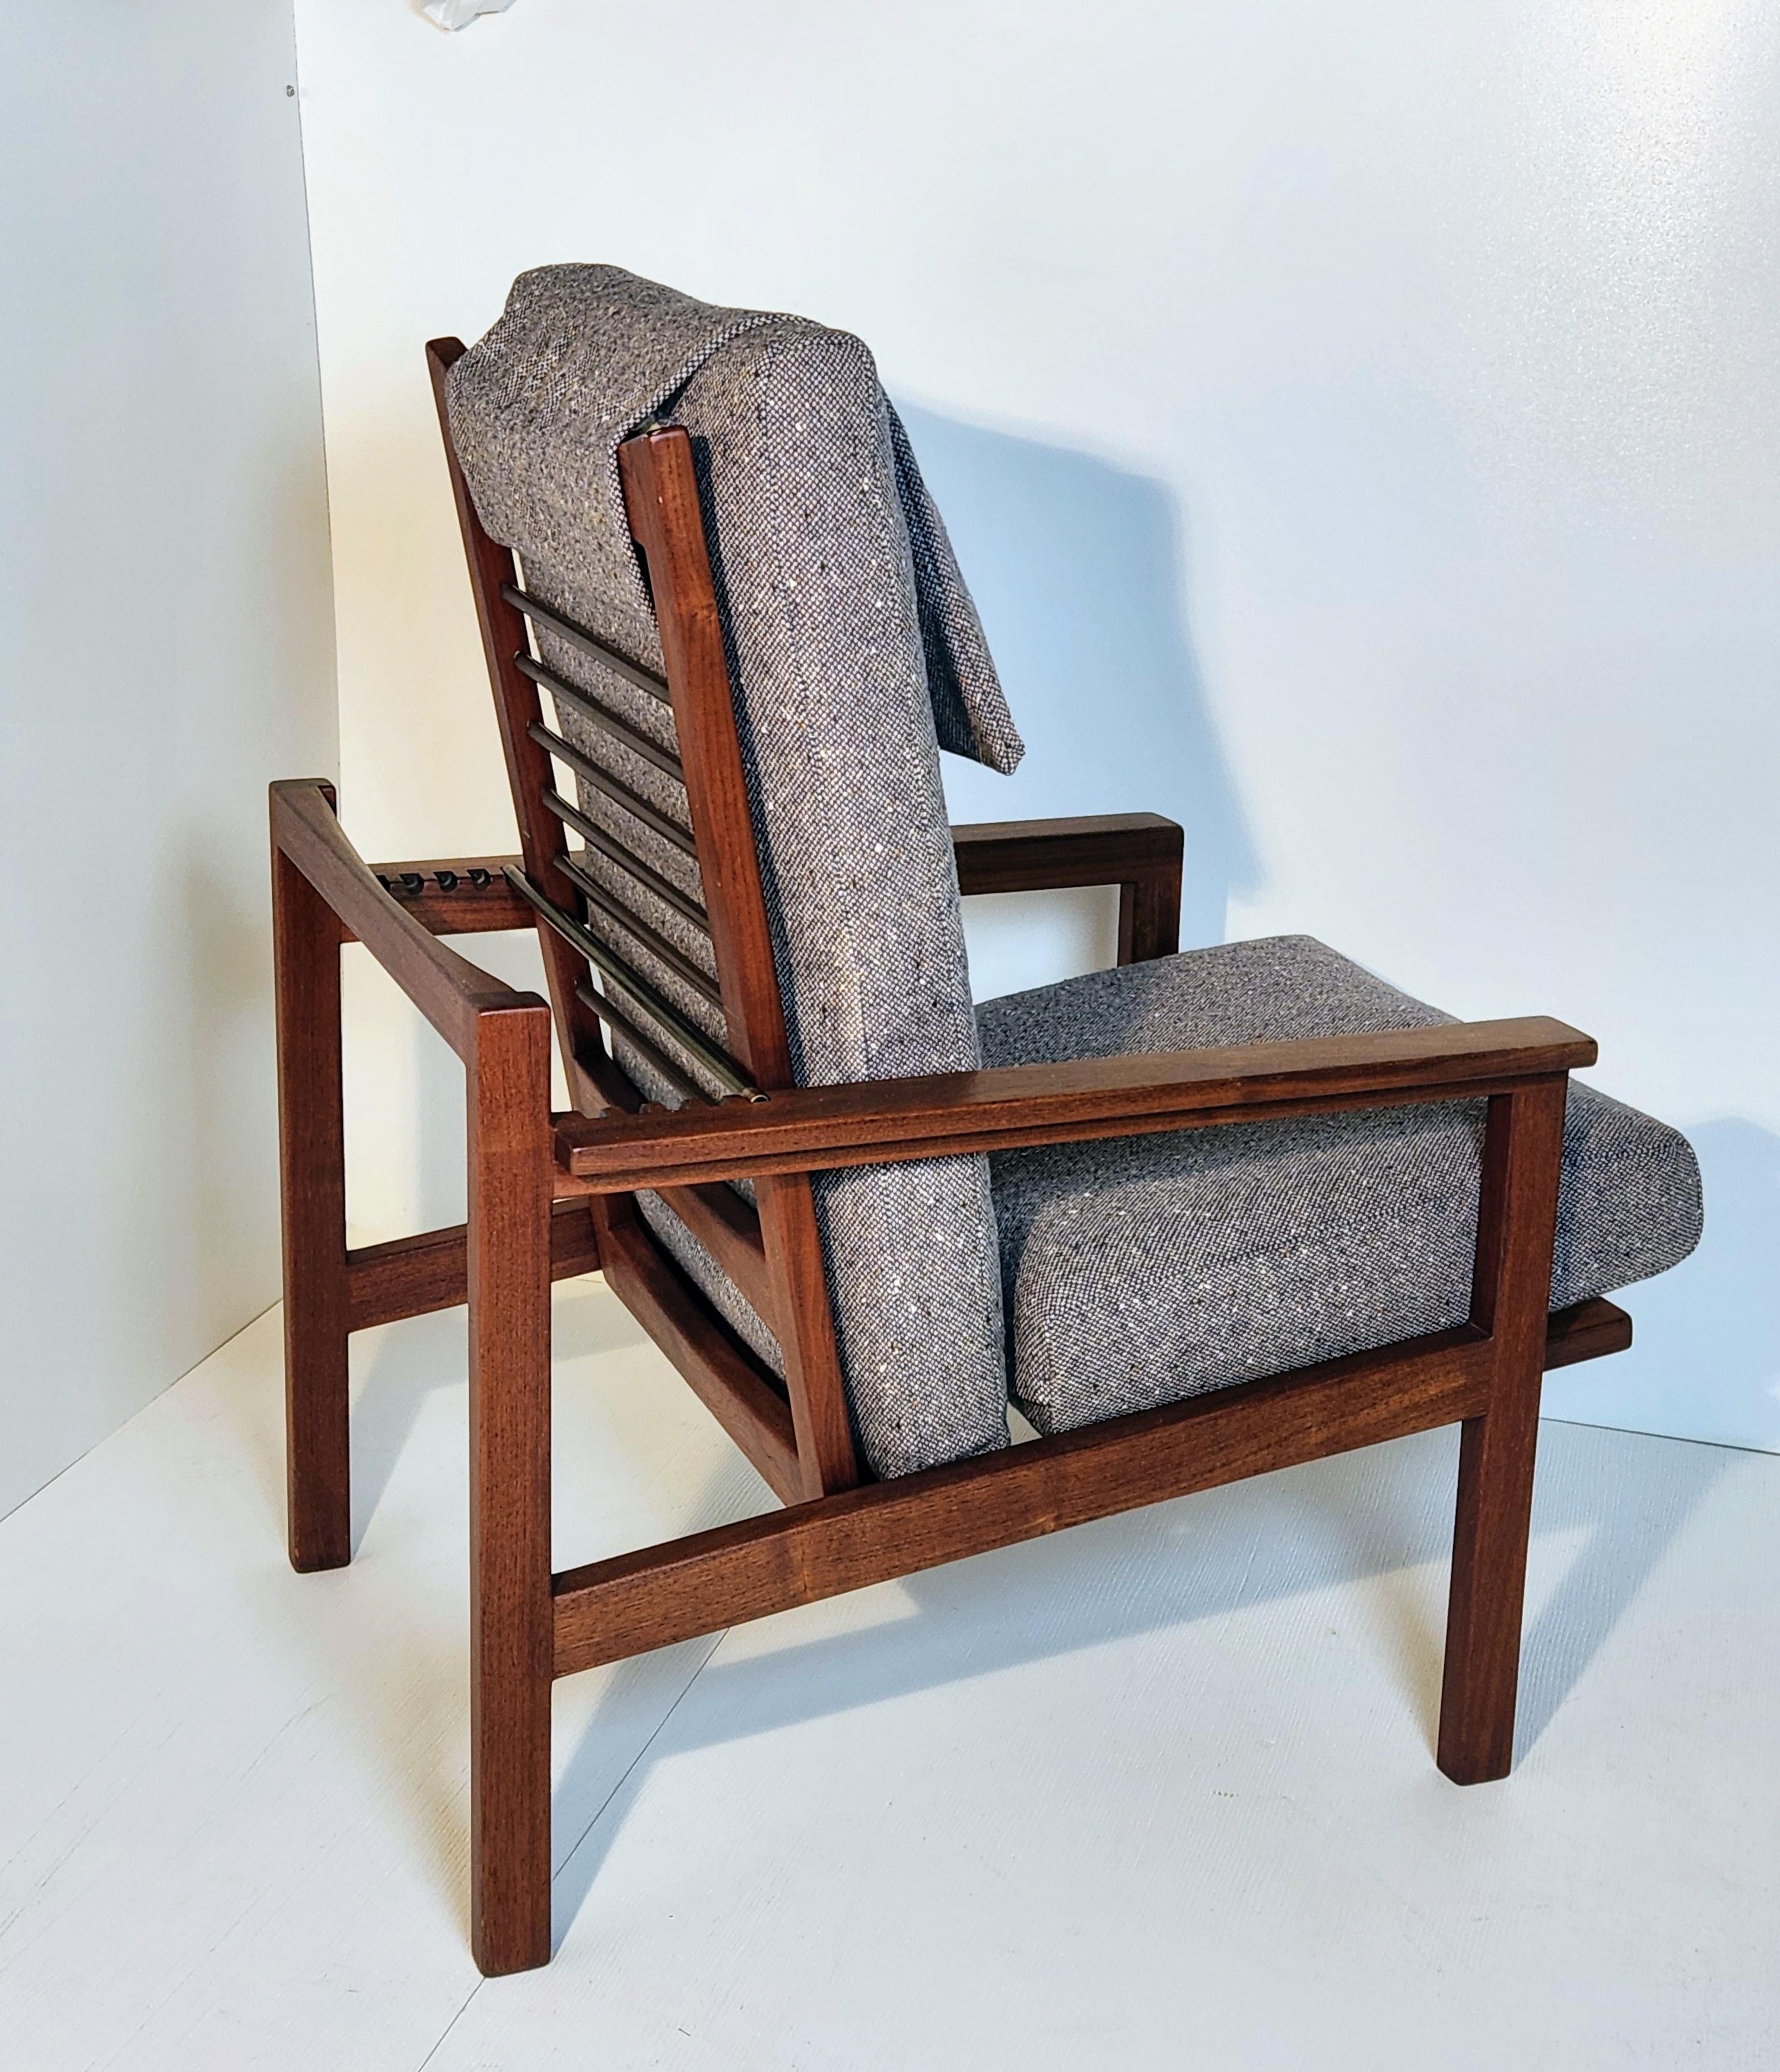 American Craftsman Walnut Adjustable Lounge Chair Arden Riddle (1921-2011) pre-1965 For Sale